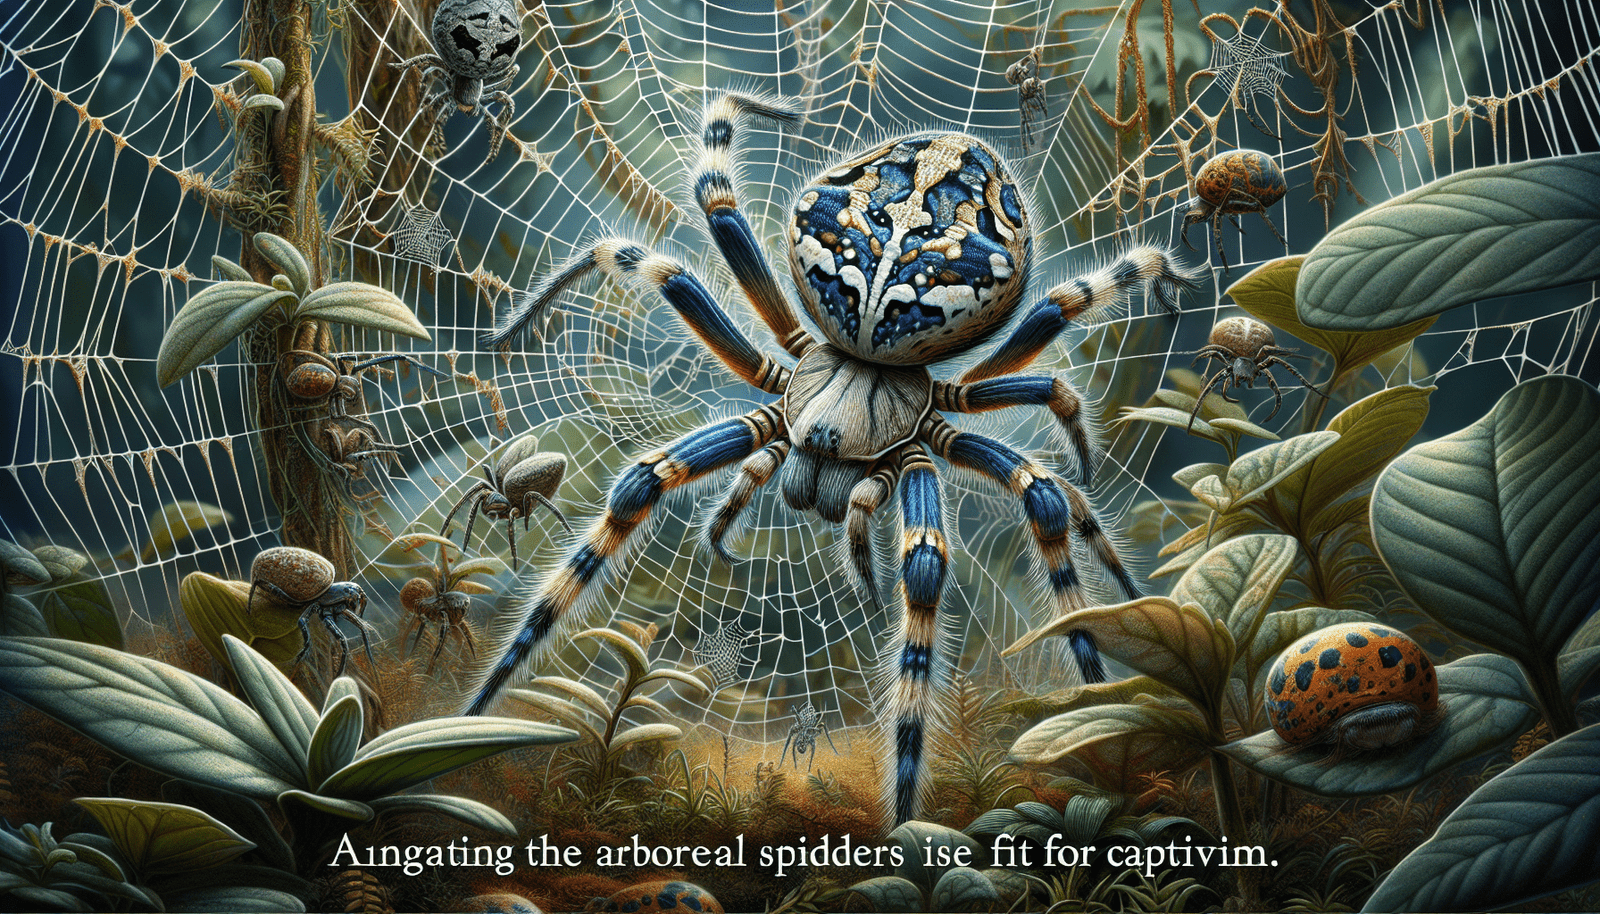 Can You Recommend Some Tree-dwelling Spider Species Suitable For Captivity?